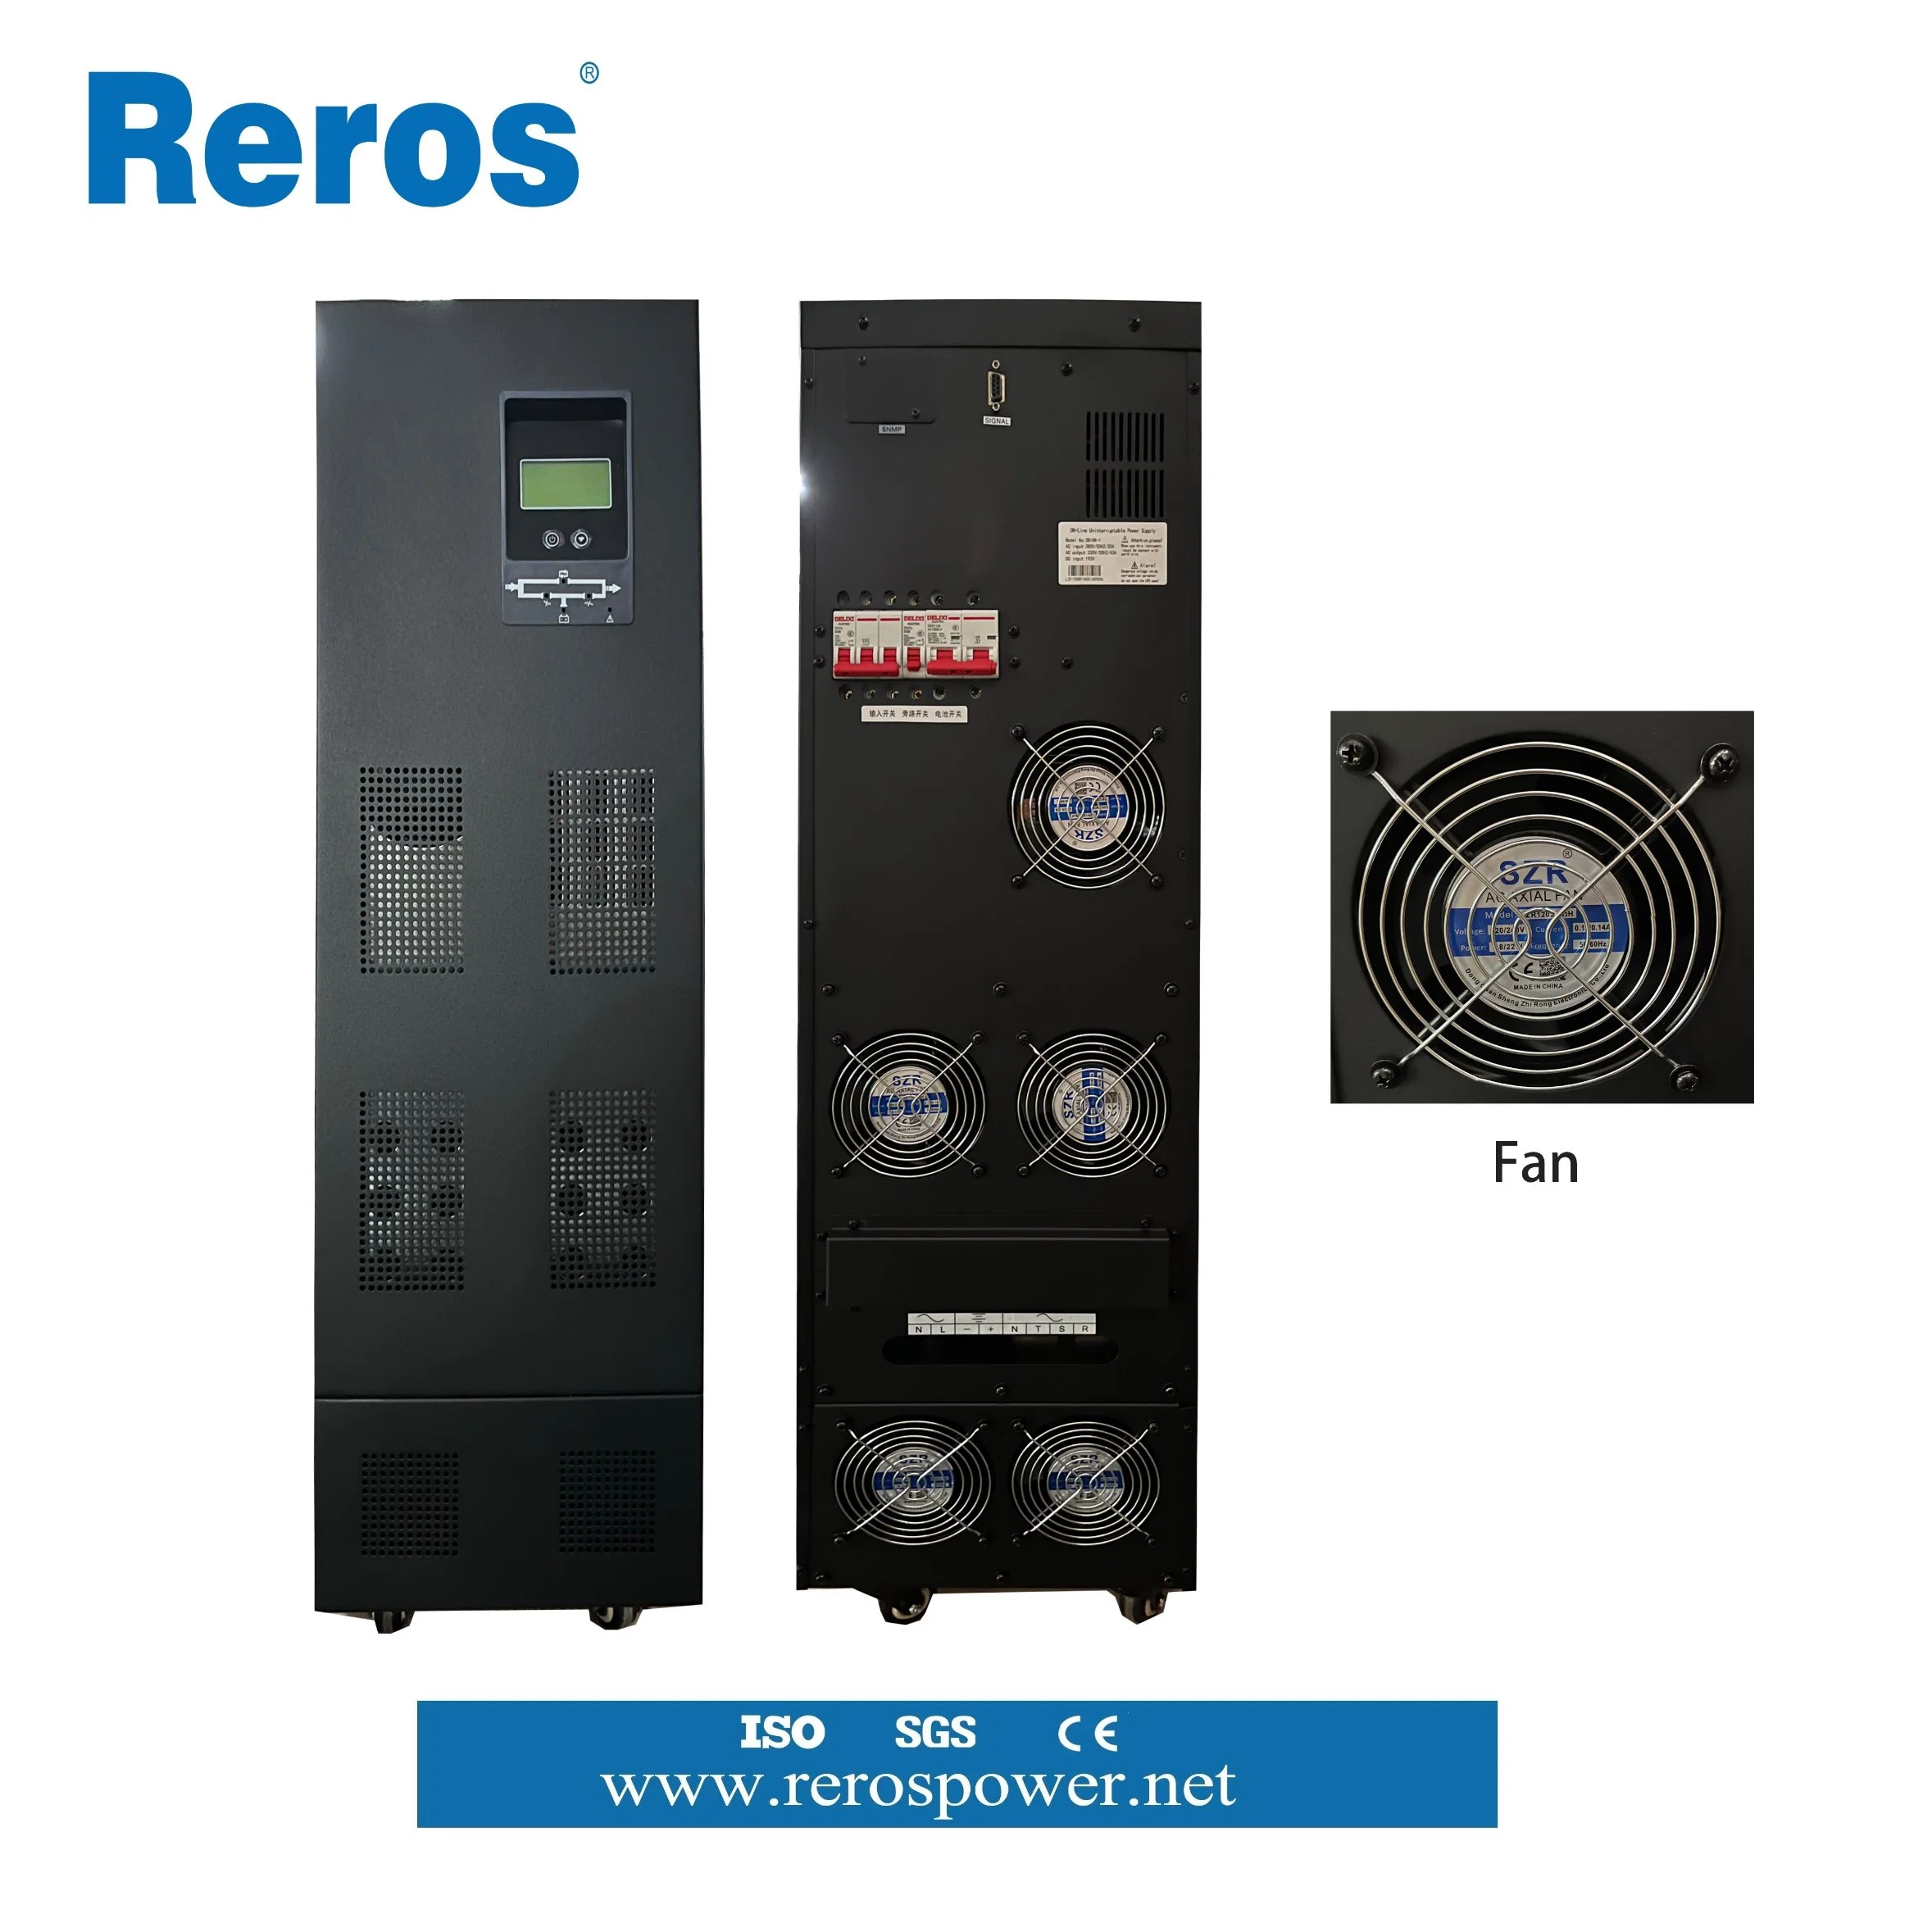 50kVA Three Phase Low Frequency Over Temperature Protection Online UPS Power Supply